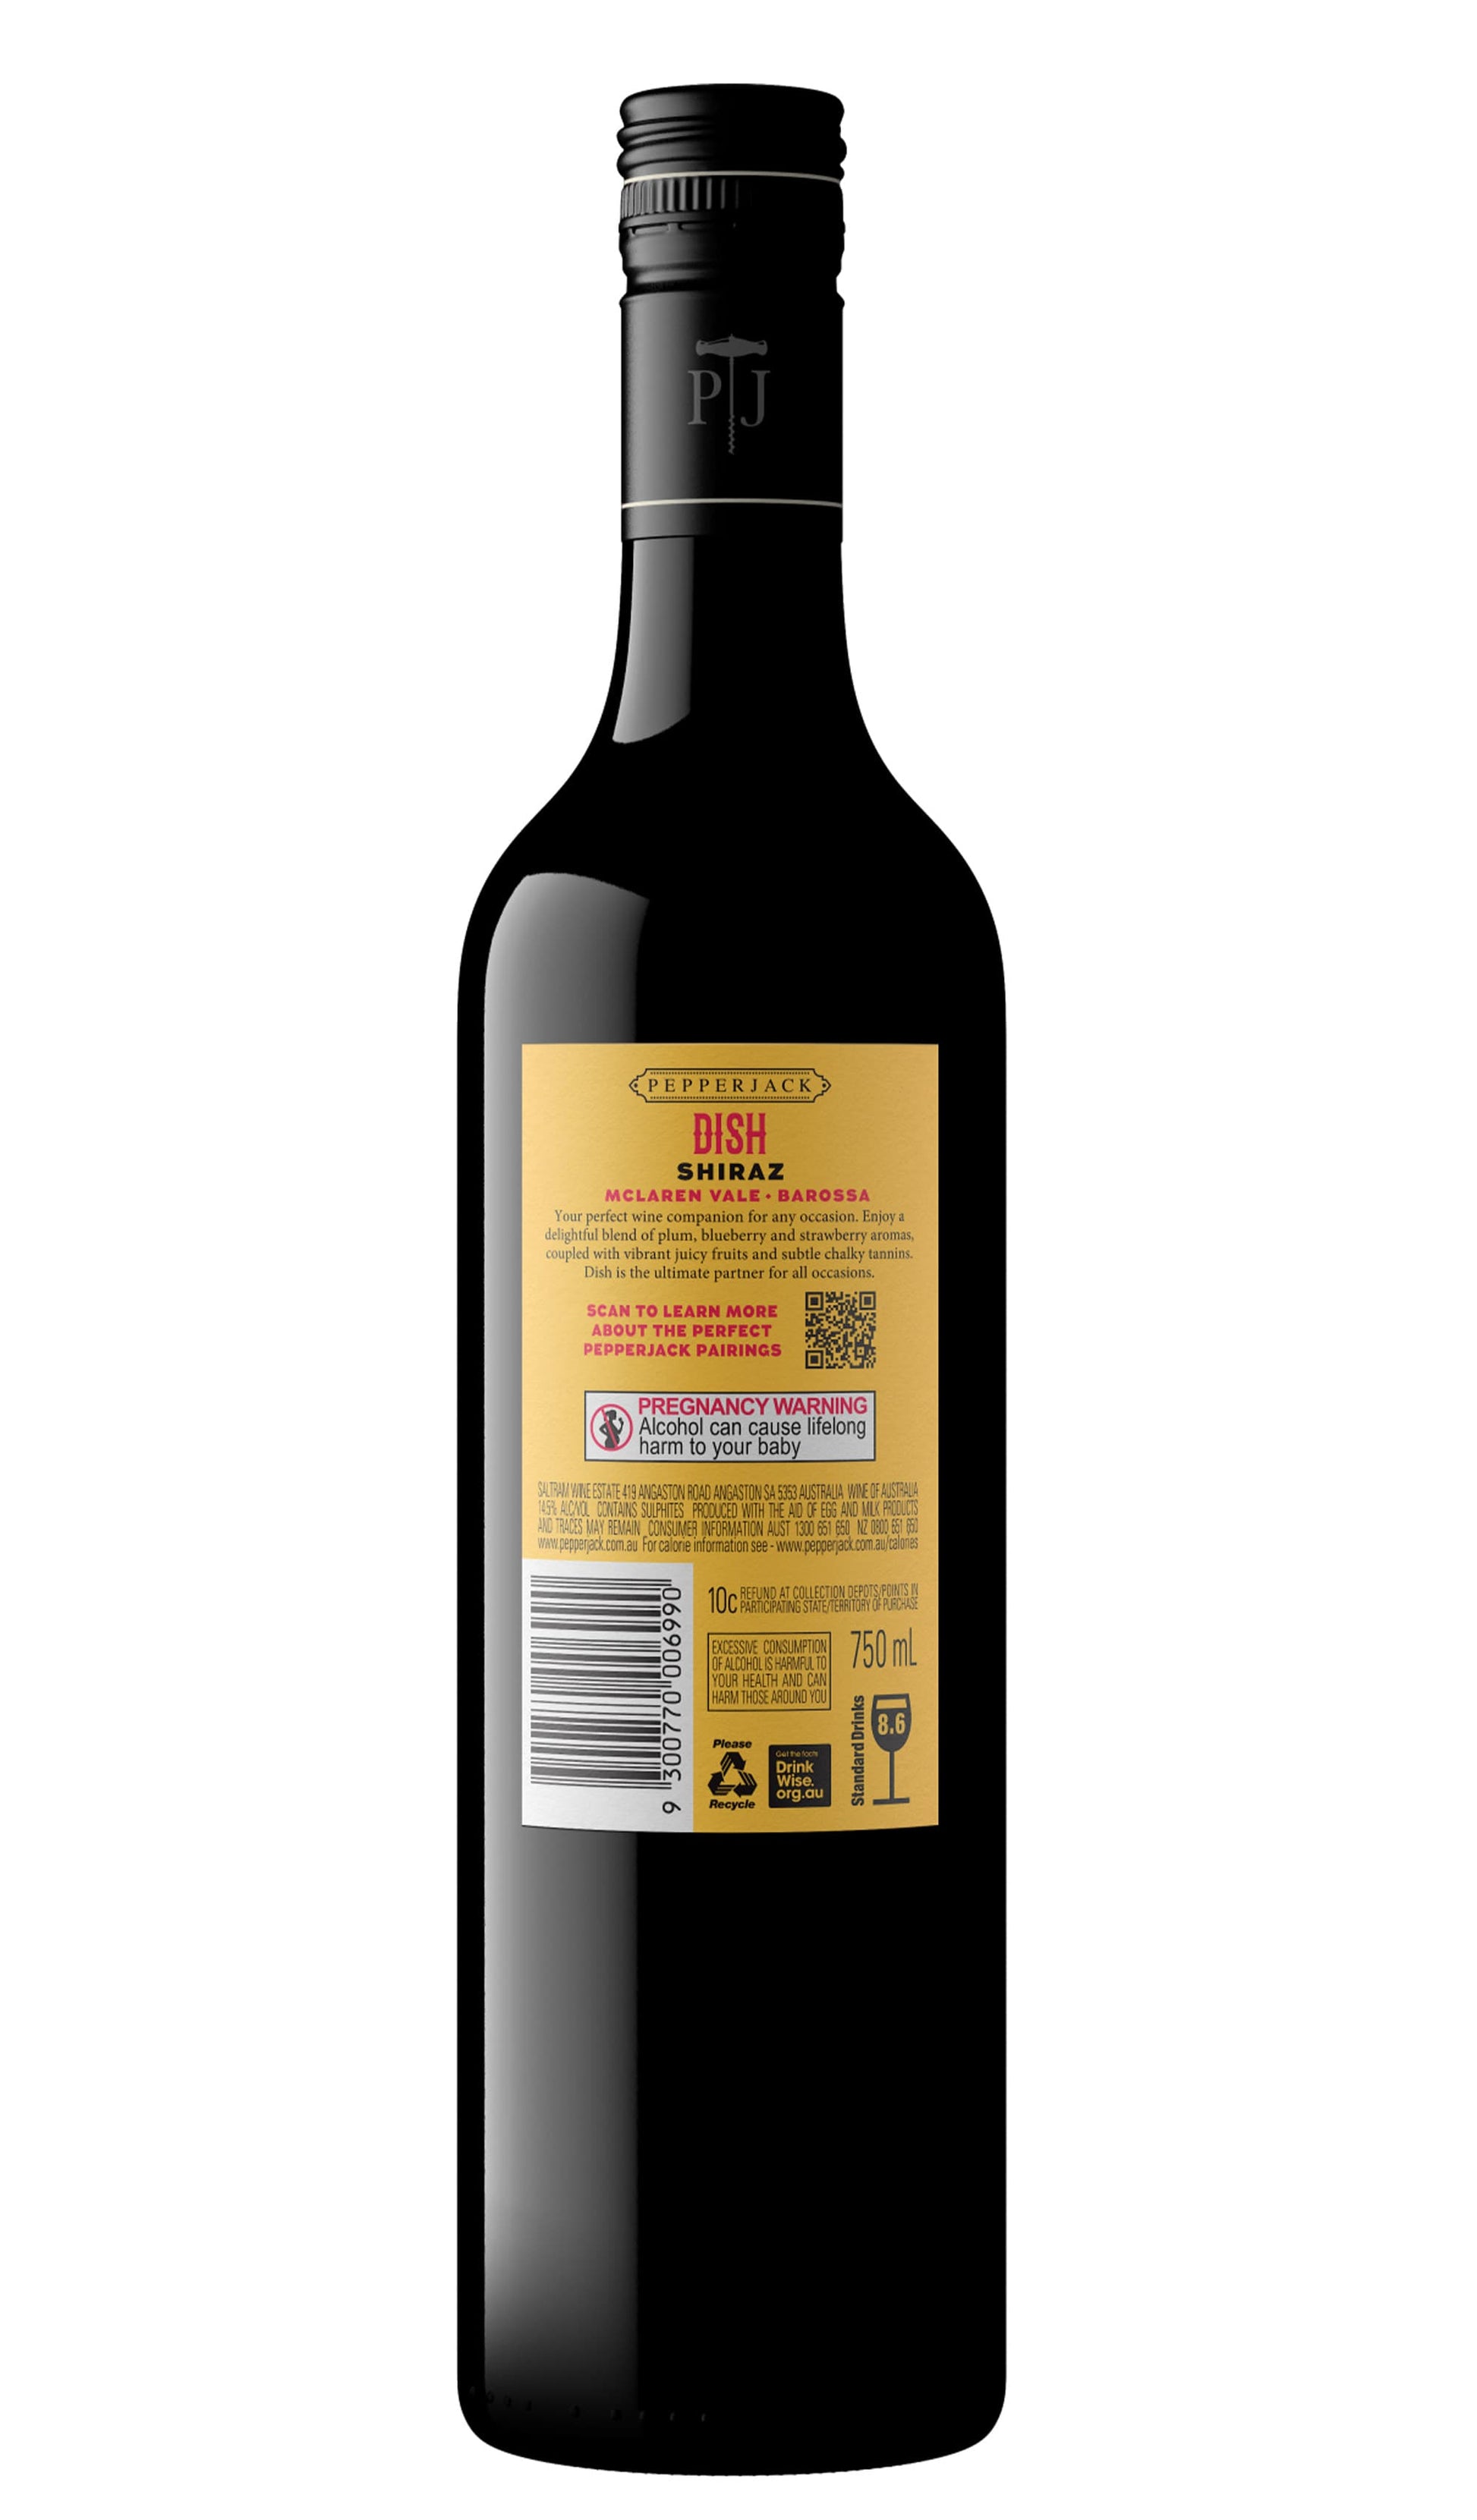 Find out more, explore the range and purchase Pepperjack Dish Shiraz 2023 (McLaren Vale & Barossa Valley) available online and in-store at Wine Sellers Direct - Australia's independent liquor specialists.